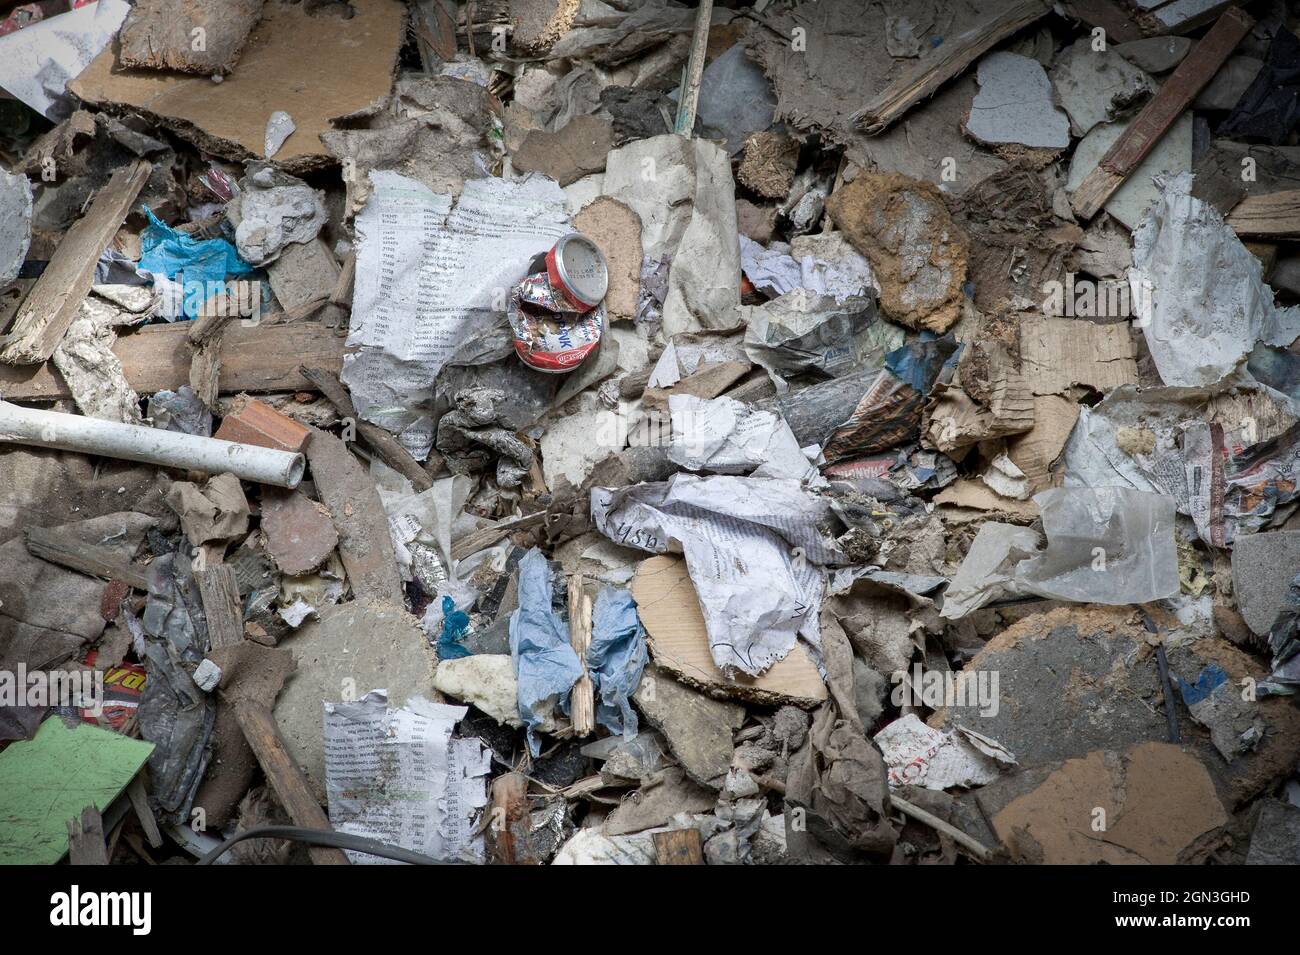 Piles of waste at a materials recycling facility in England. Stock Photo